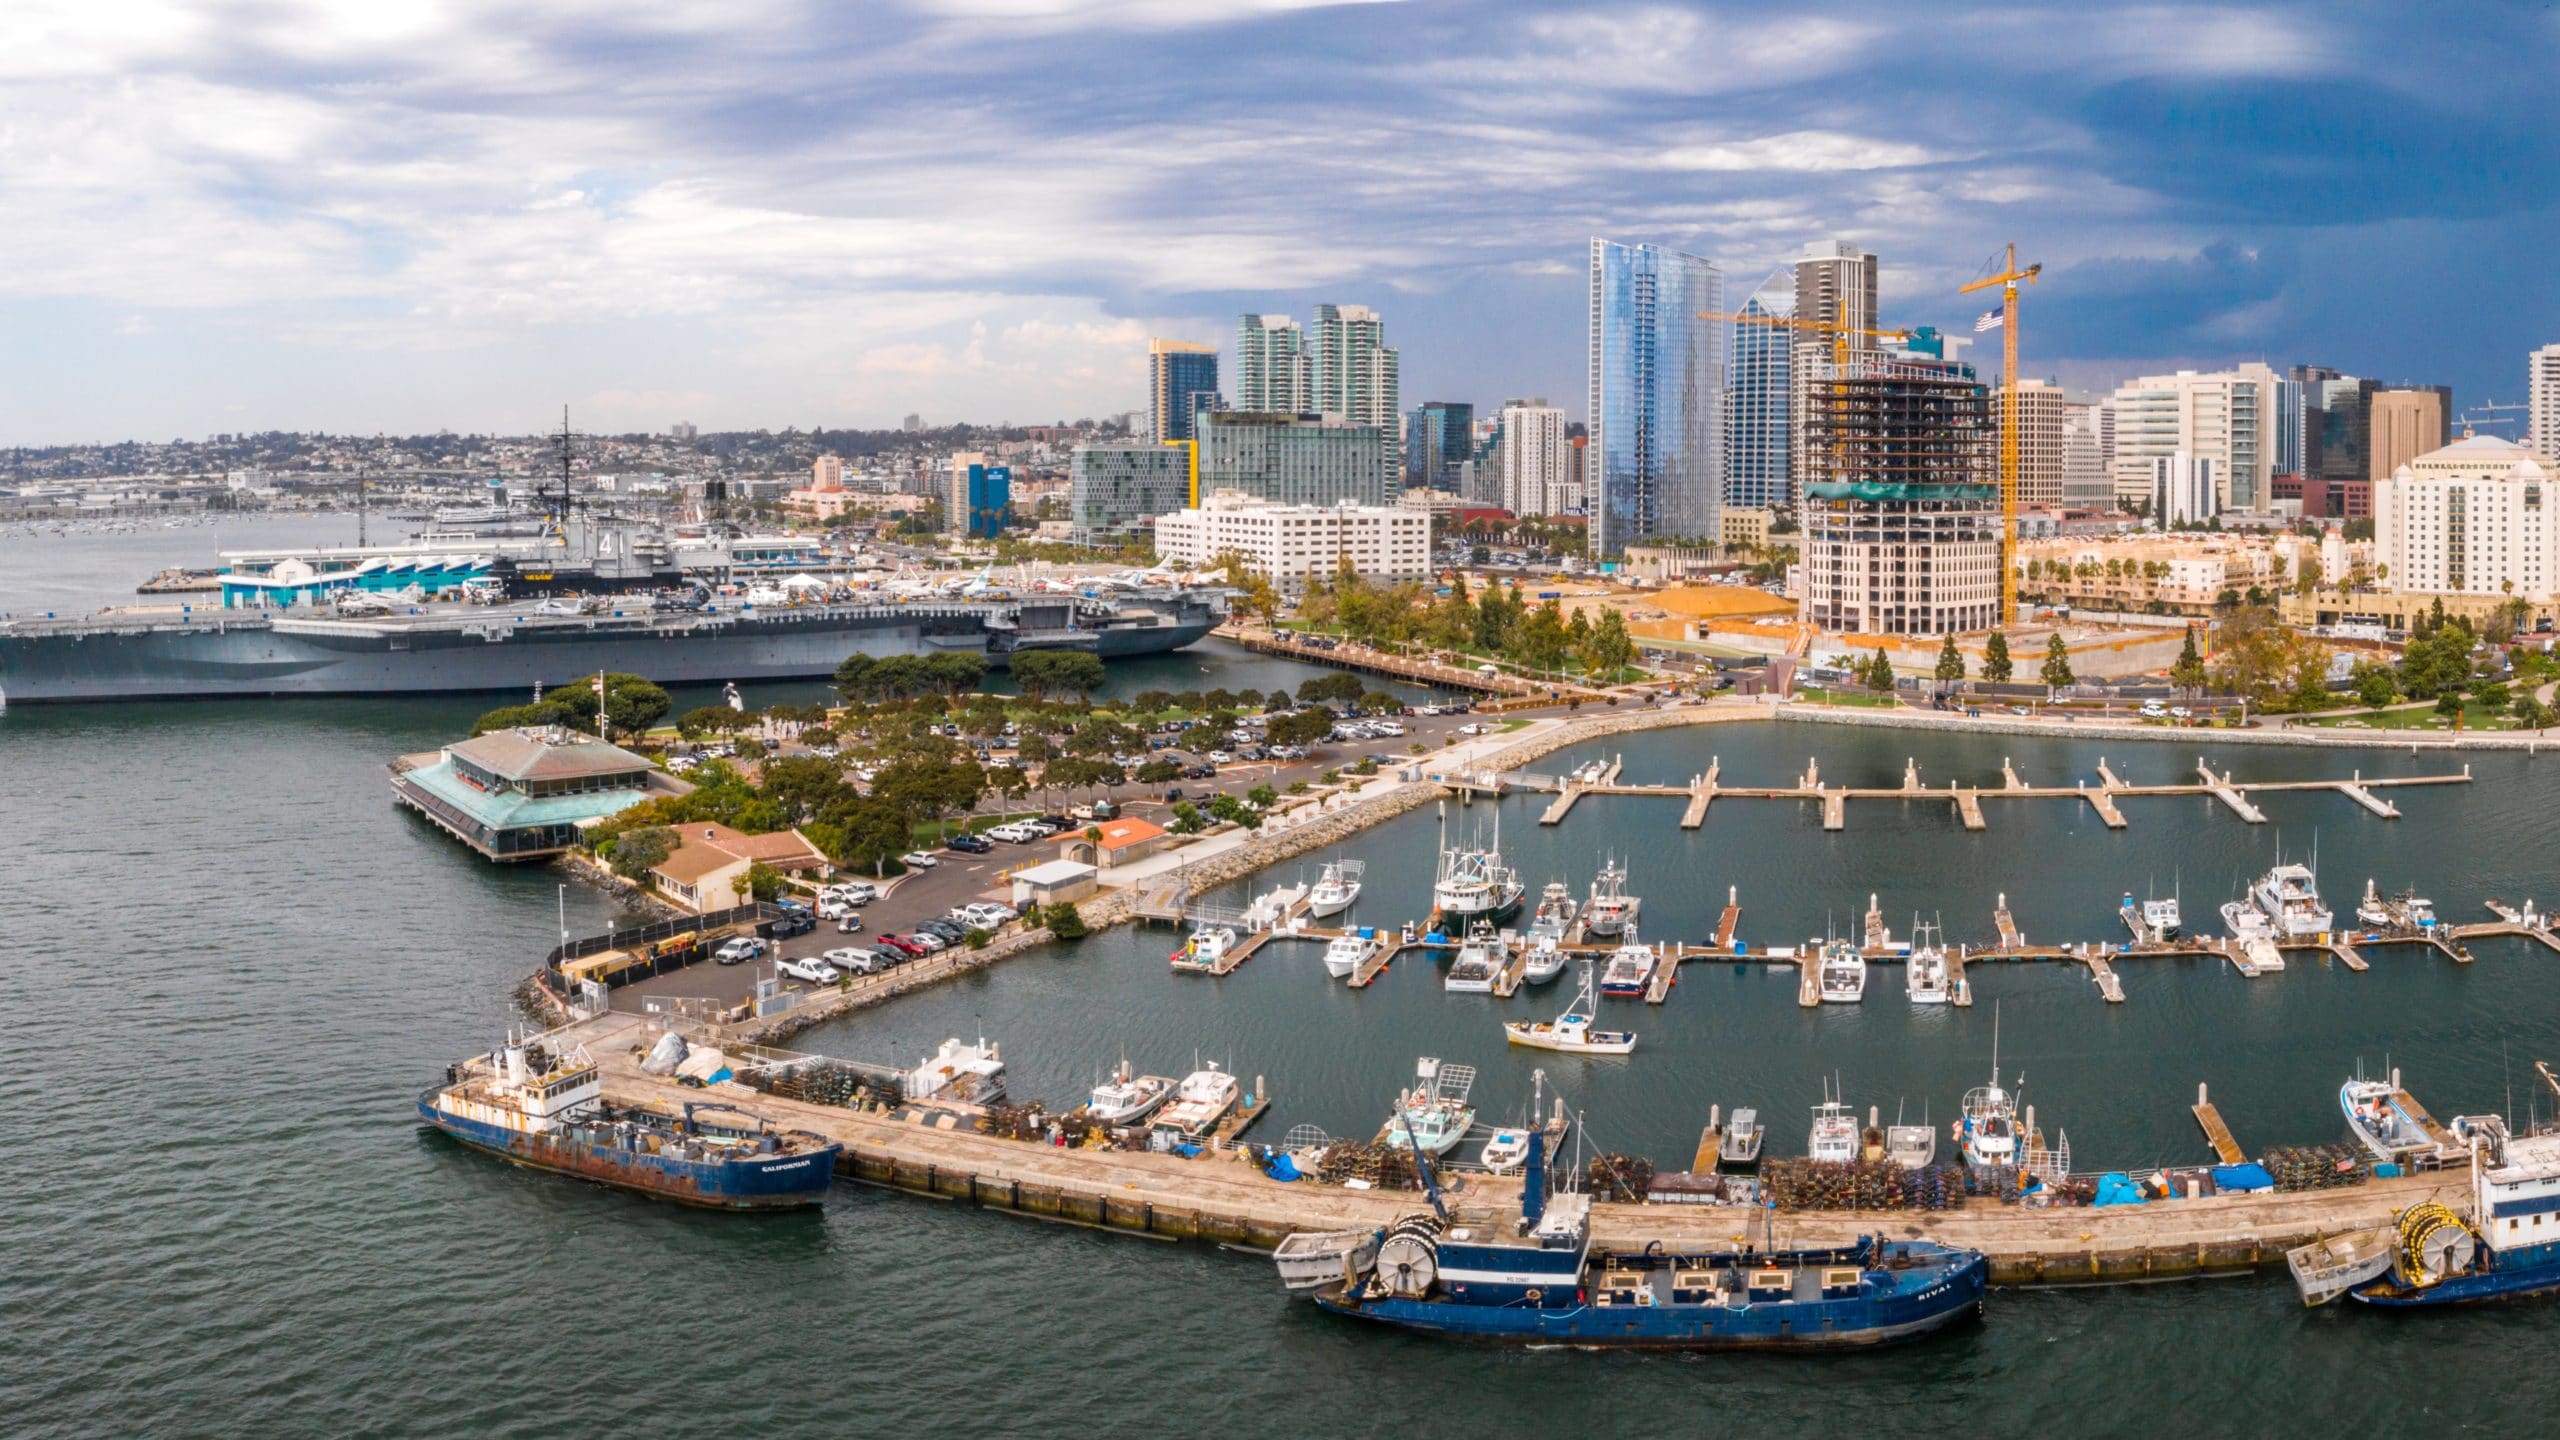 Amazing panoramic view of the San Diego downtown by the harbour